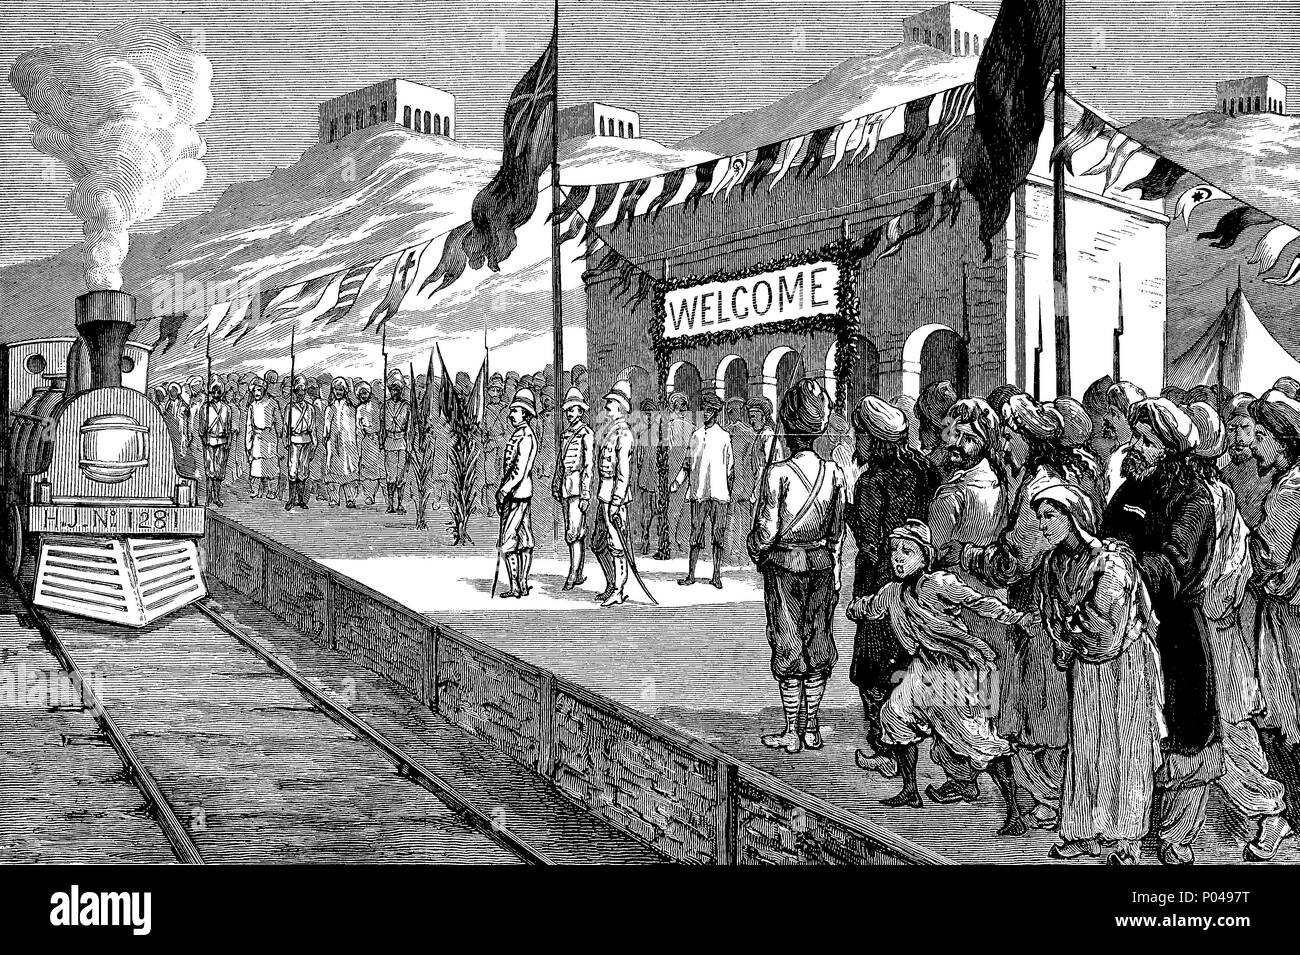 the tour of the viceroy of India, arrival of the viceregal train at Sibi, Governor-General of India, digital improved reproduction of an original print from the year 1881 Stock Photo